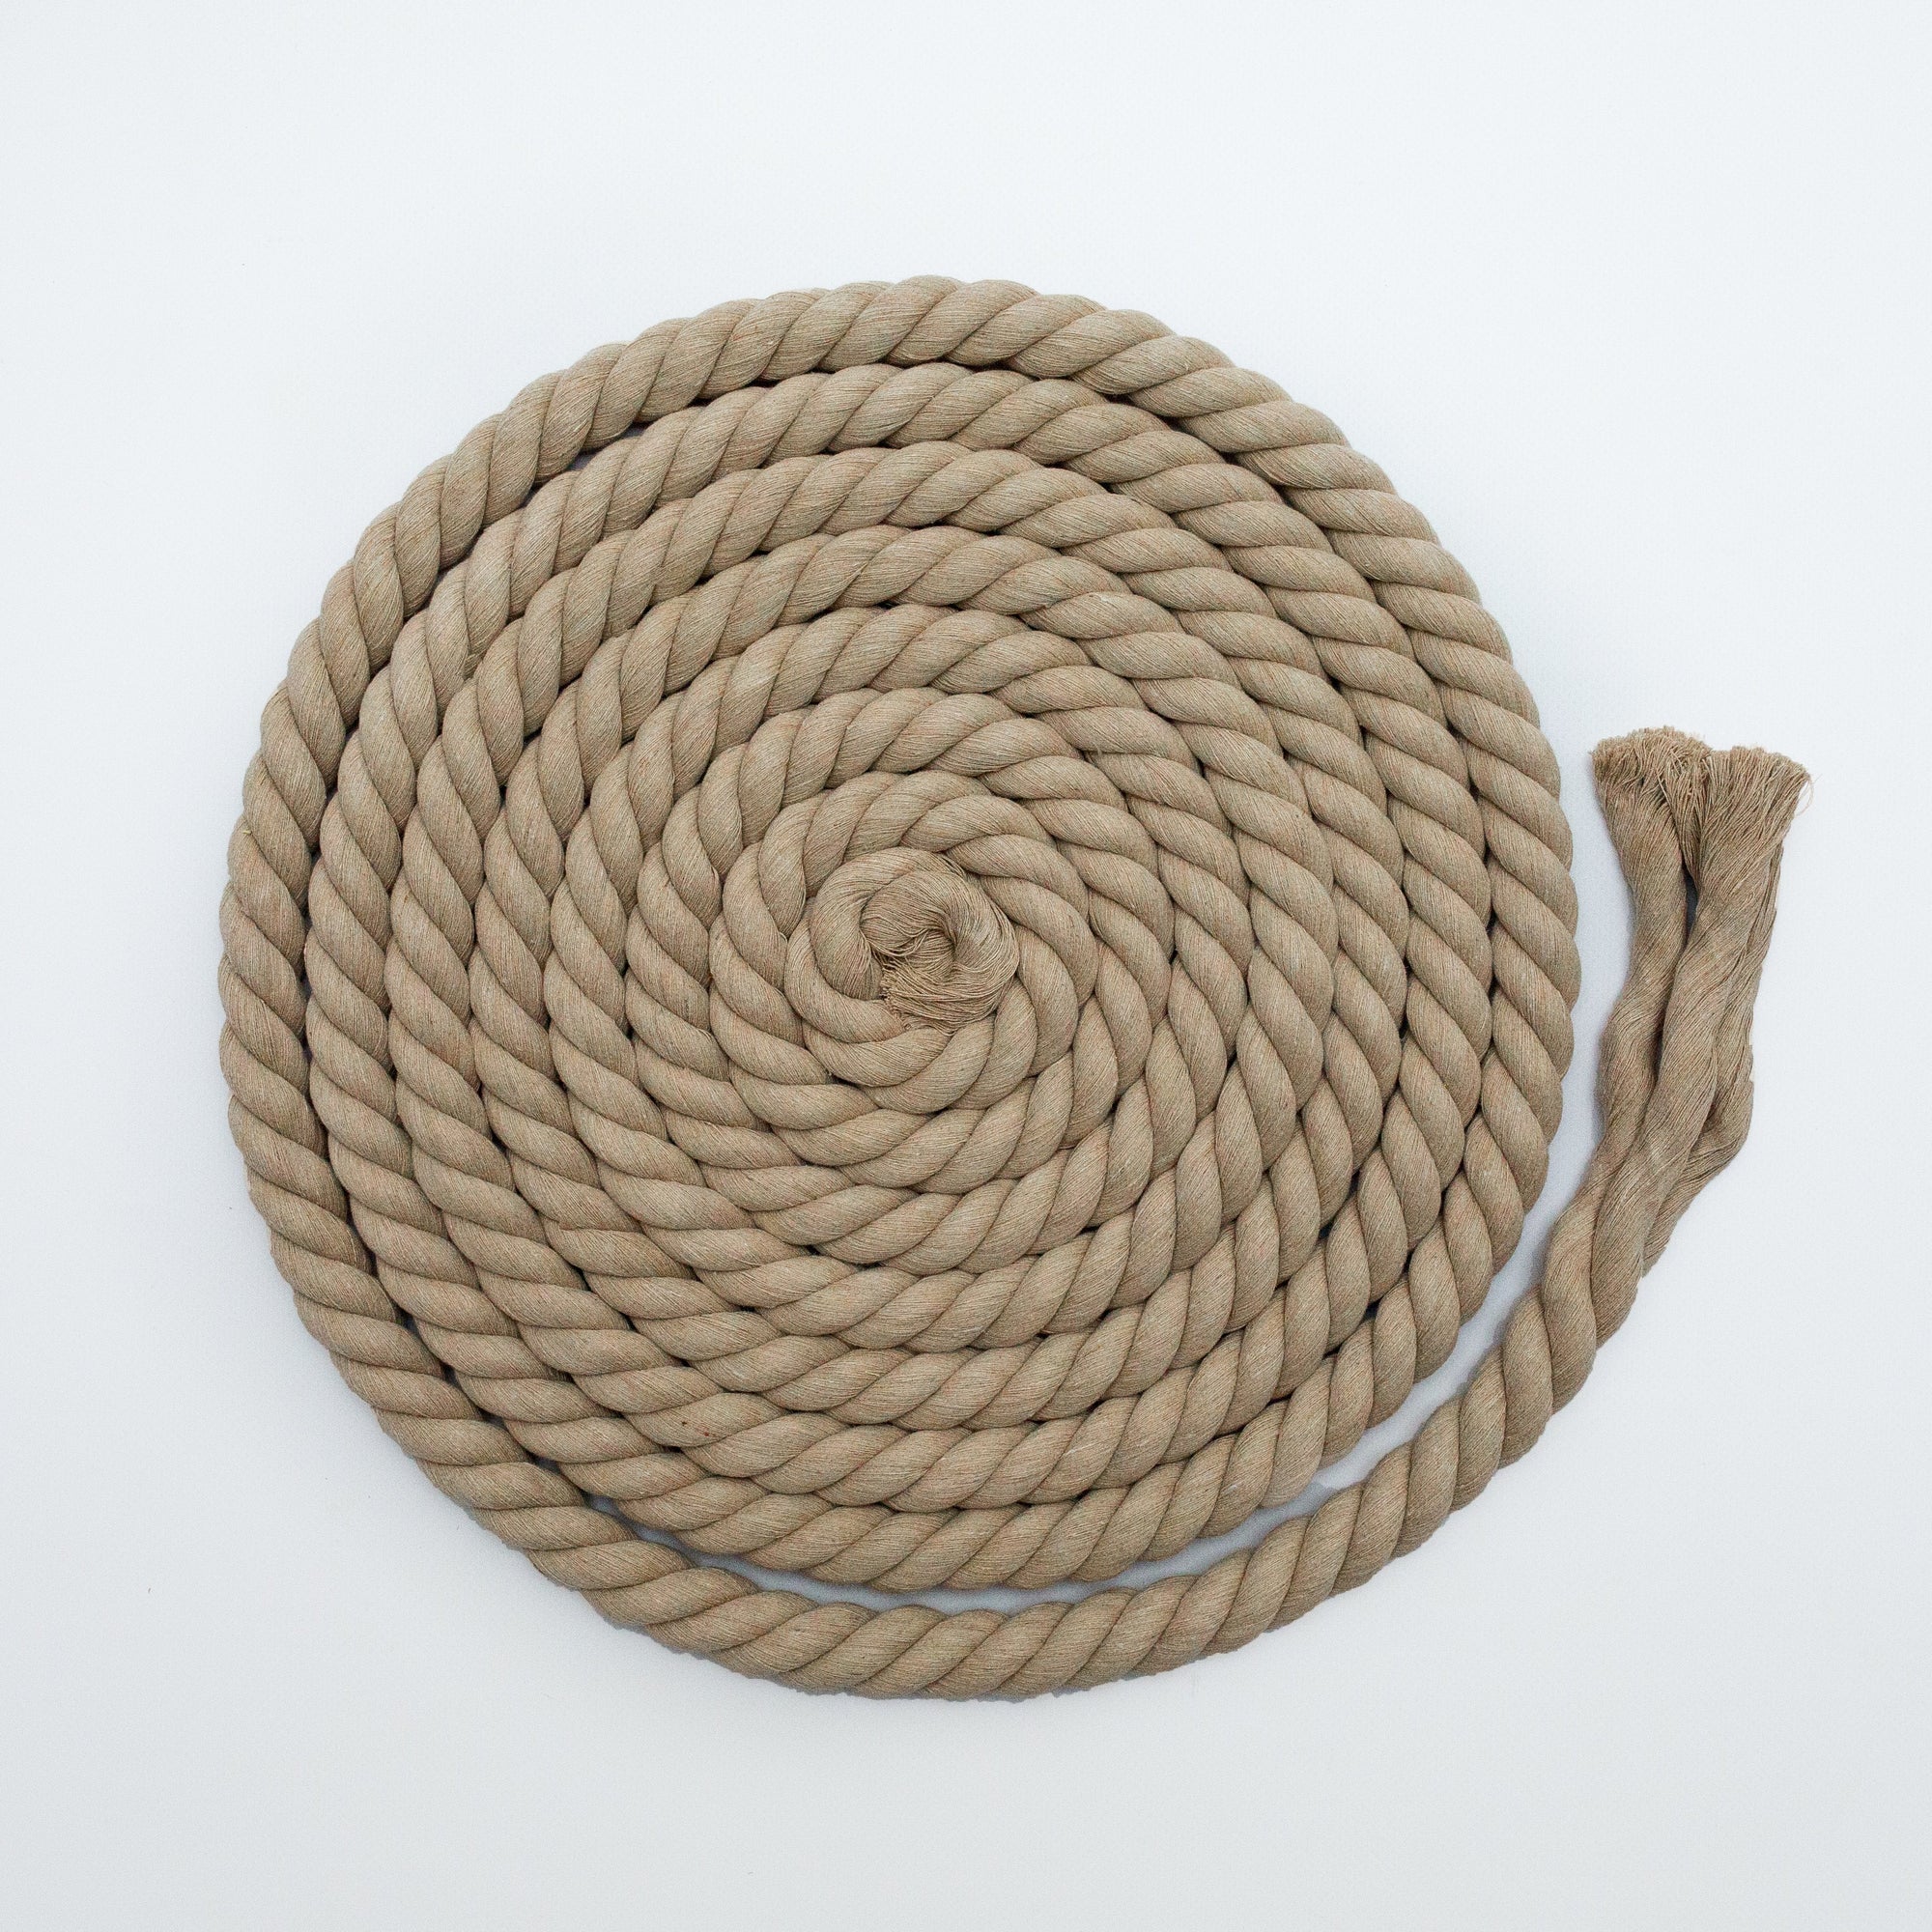 Mary Maker Studio 3Ply Twisted Rope Nude 1m 20mm Coloured Macrame Rope macrame cotton macrame rope macrame workshop macrame patterns macrame